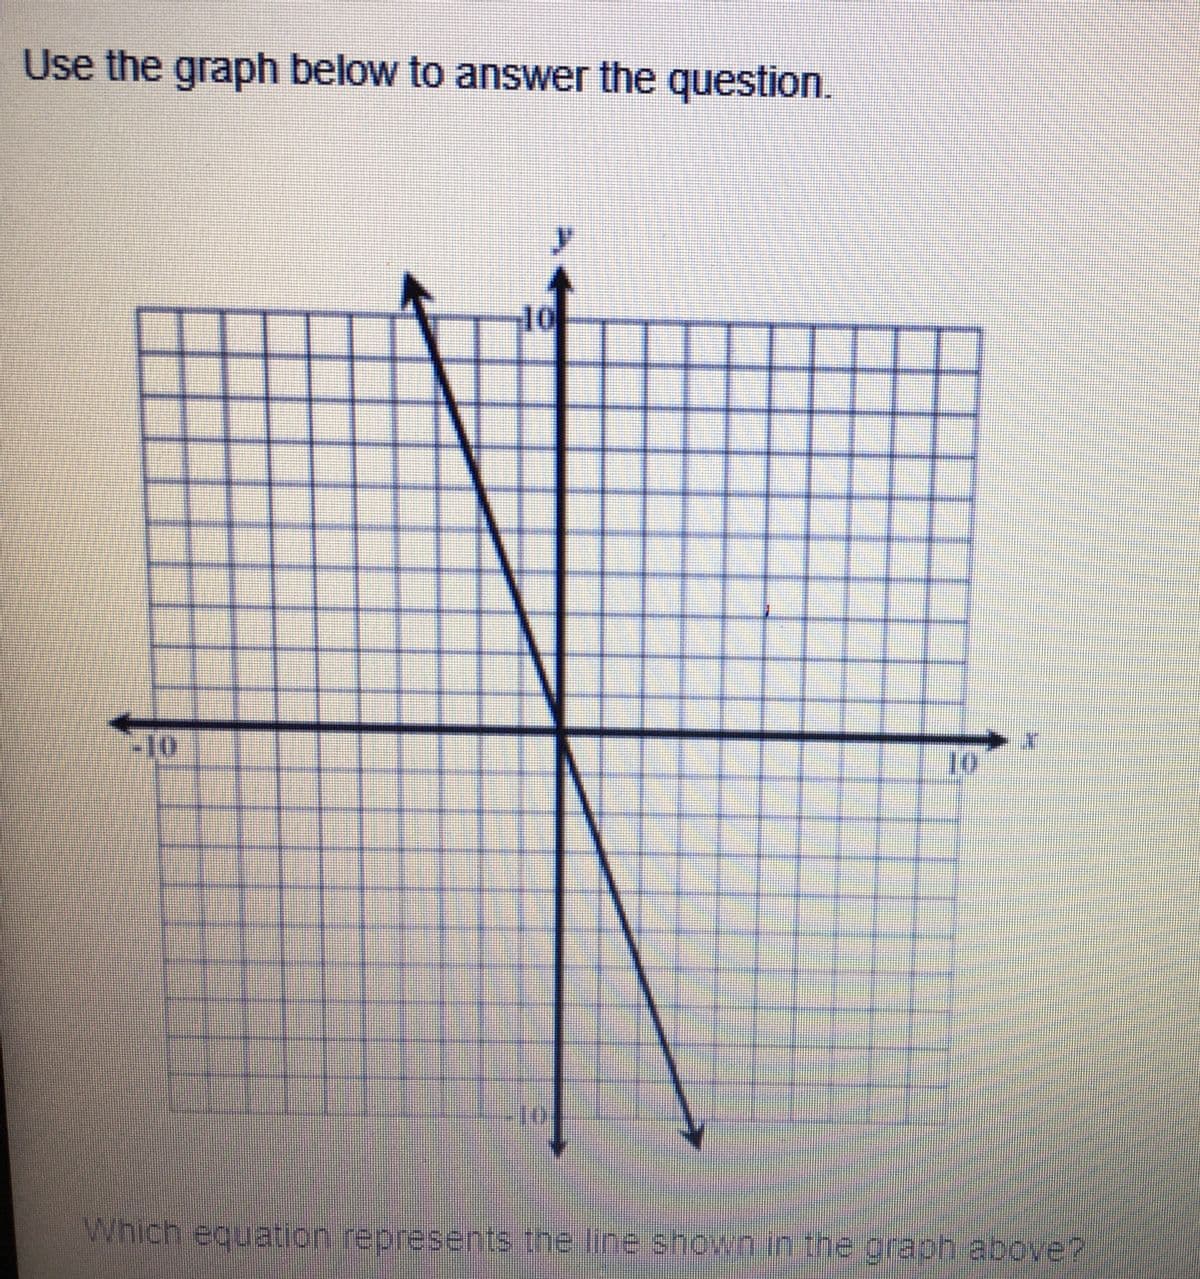 Use the graph below to answer the question.
10
10
Which equation represents the line shown in the graph above?
